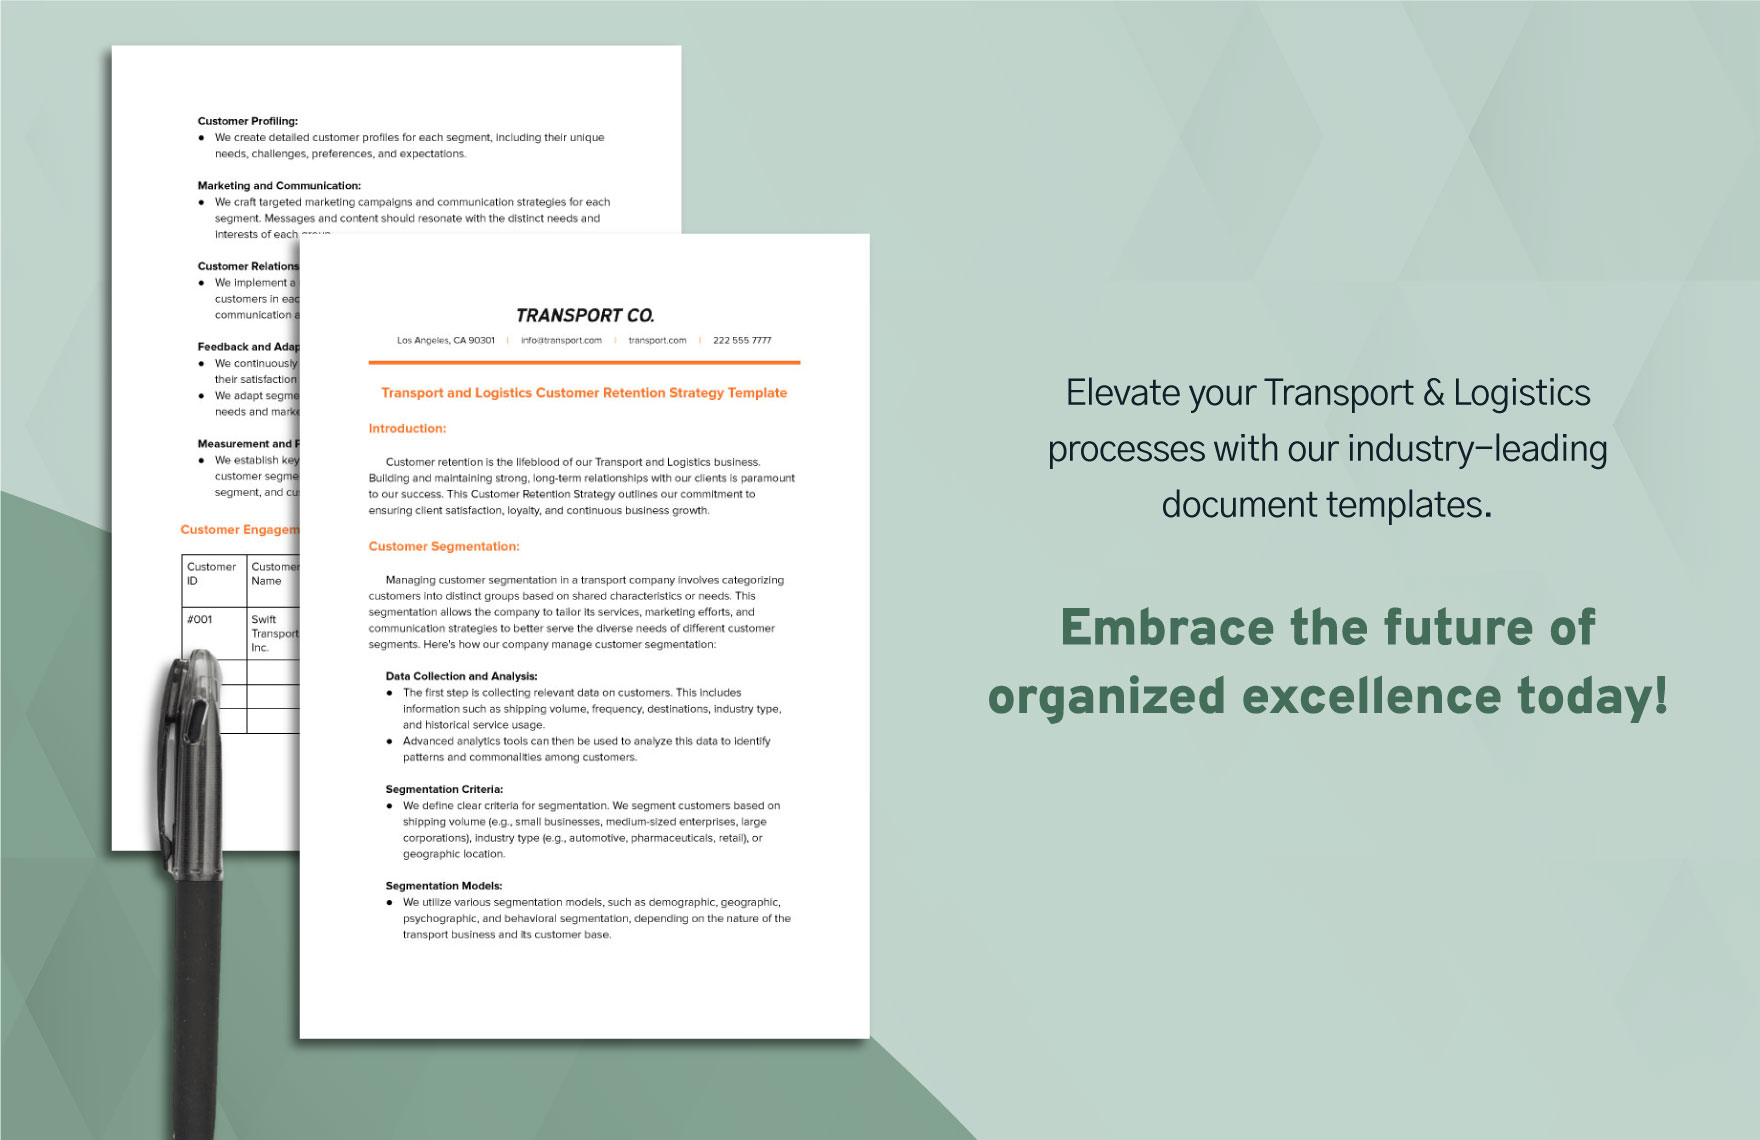 Transport and Logistics Customer Retention Strategy Template